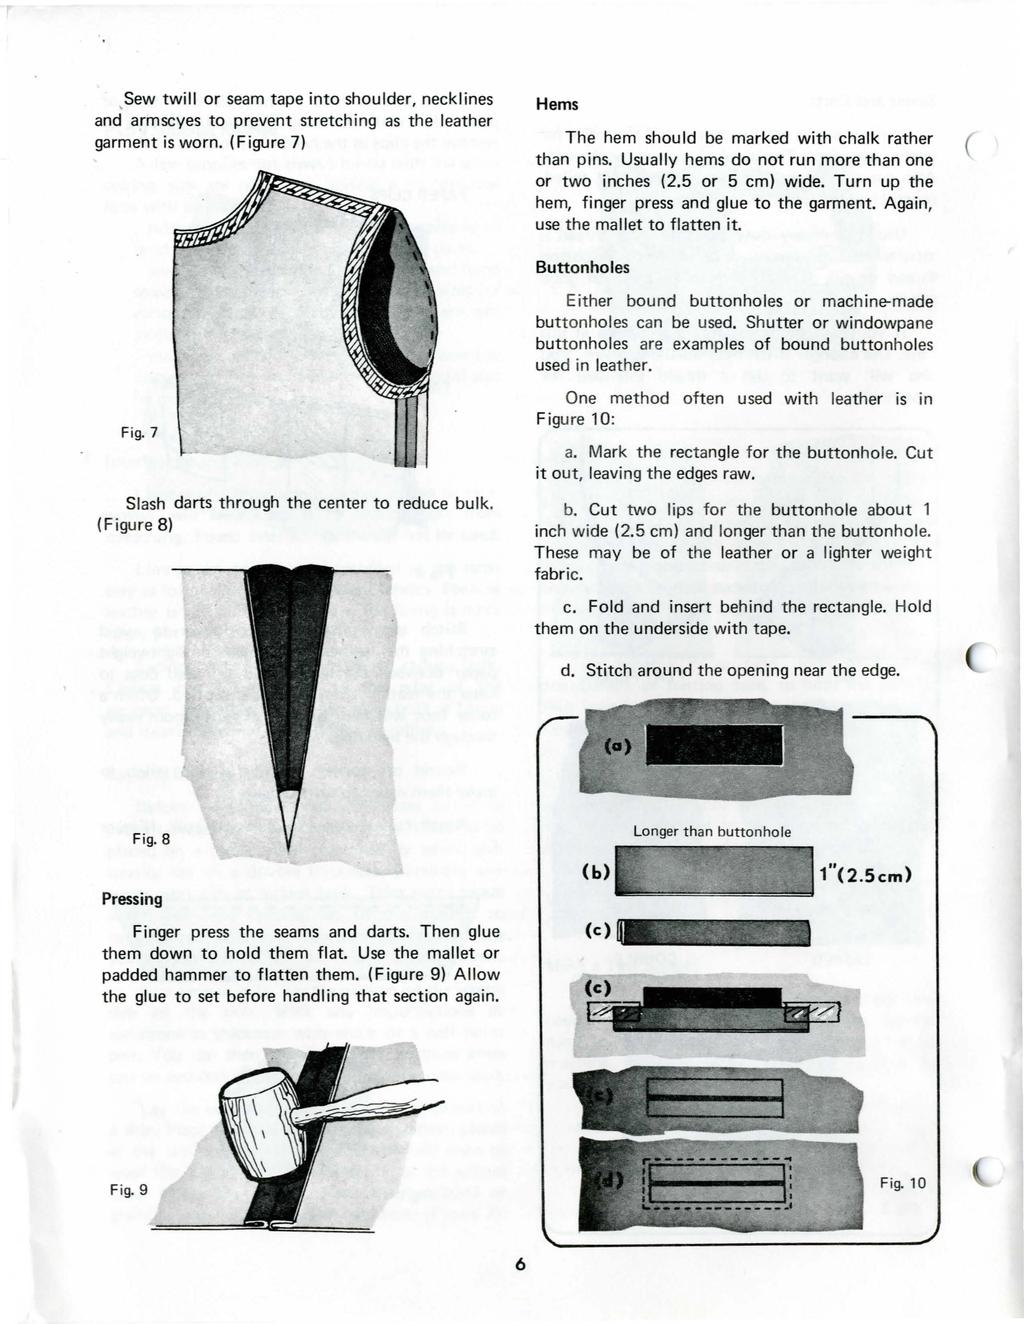 ,Sew twill or seam tape into shoulder, necklines and armscyes to prevent stretching as the leather garment is worn. (Figure 7) Hems The hem should be marked with chalk rather than pins.